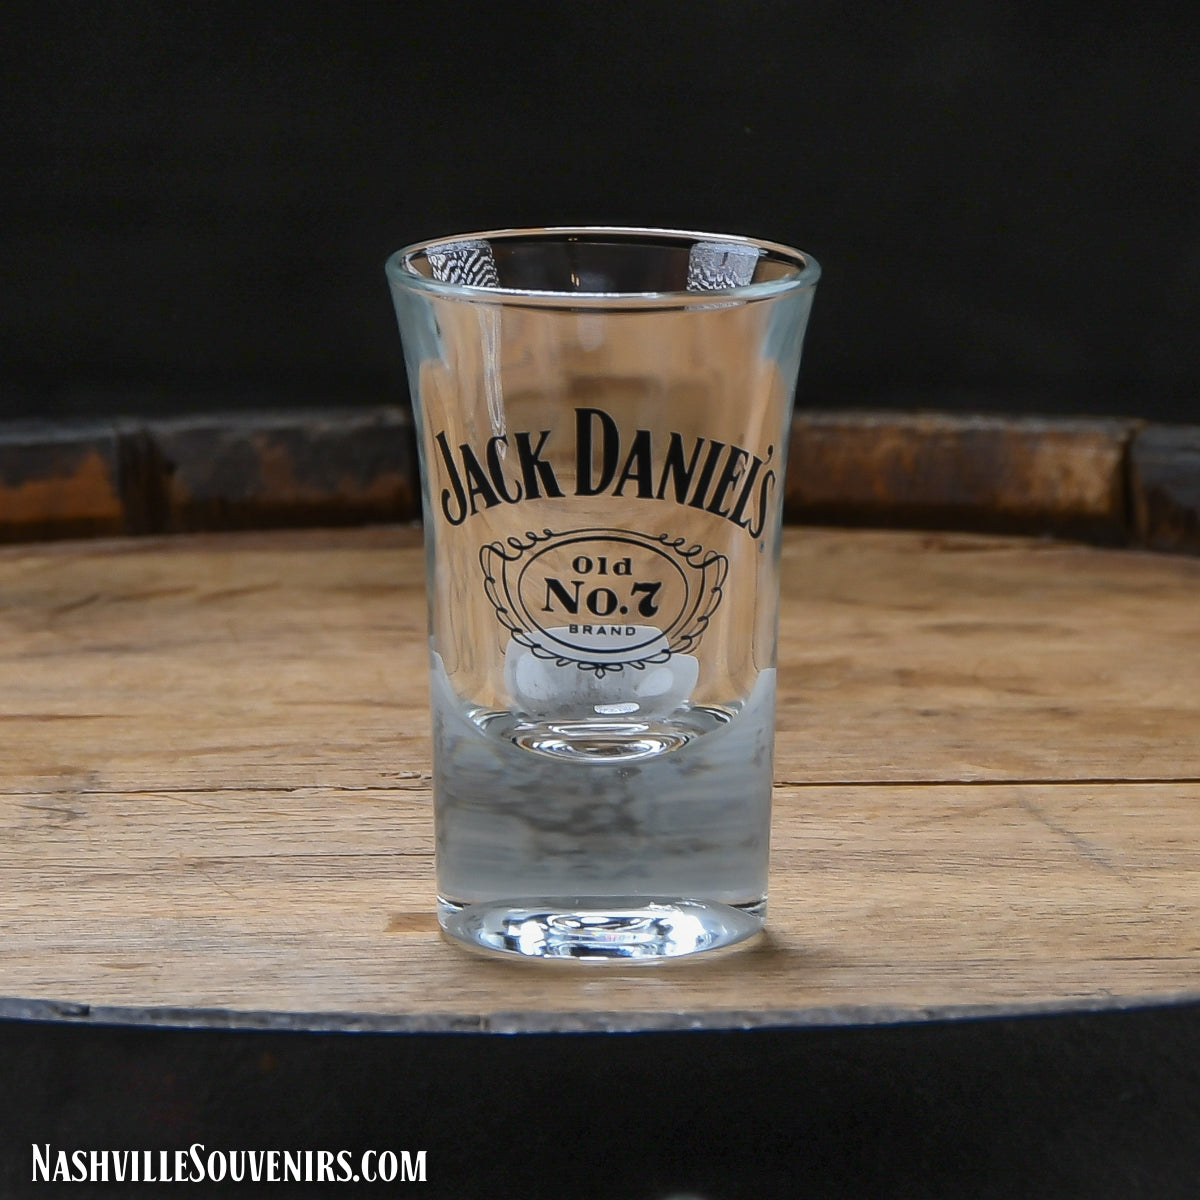 Officially licensed Jack Daniels Old No.7 Shot Glass with black logo Get yours today with FREE SHIPPING on all US orders over $75!